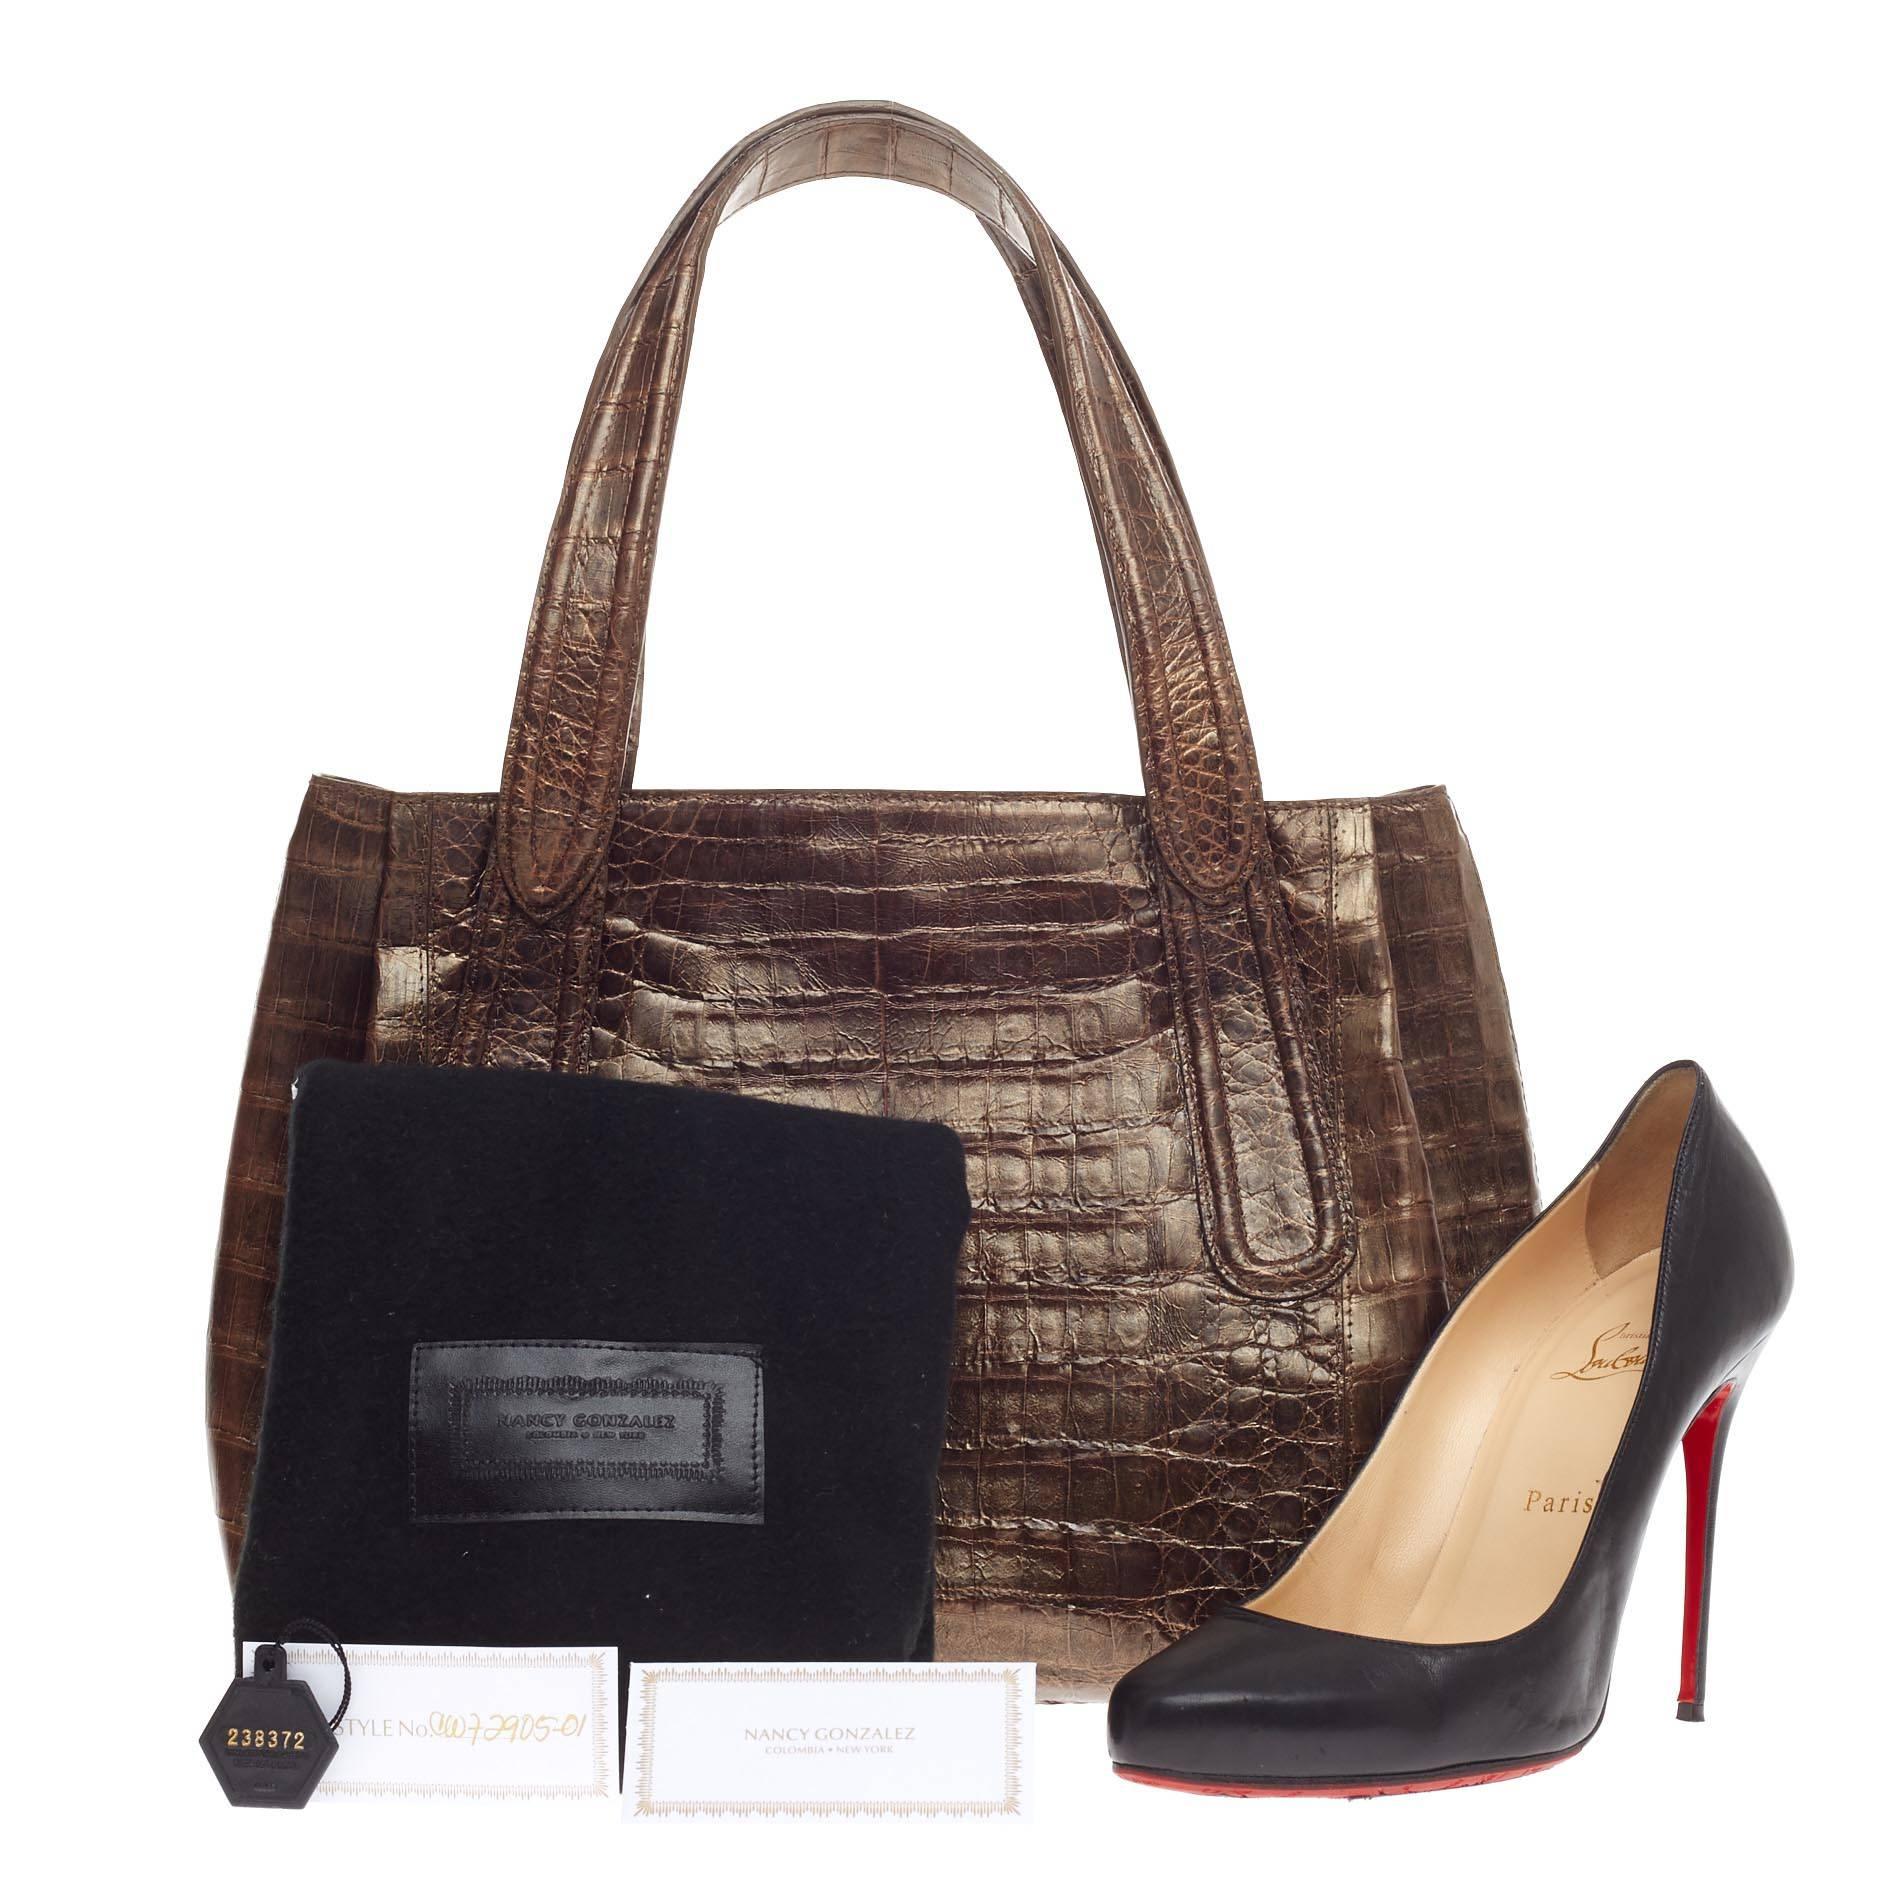 This authentic Nancy Gonzalez Tote Crocodile Medium showcases a perfect polished look made for daily or work excursions. Crafted from metallic bronze genuine crocodile skin, this simple yet elegant tote features dual tall handles, protective base